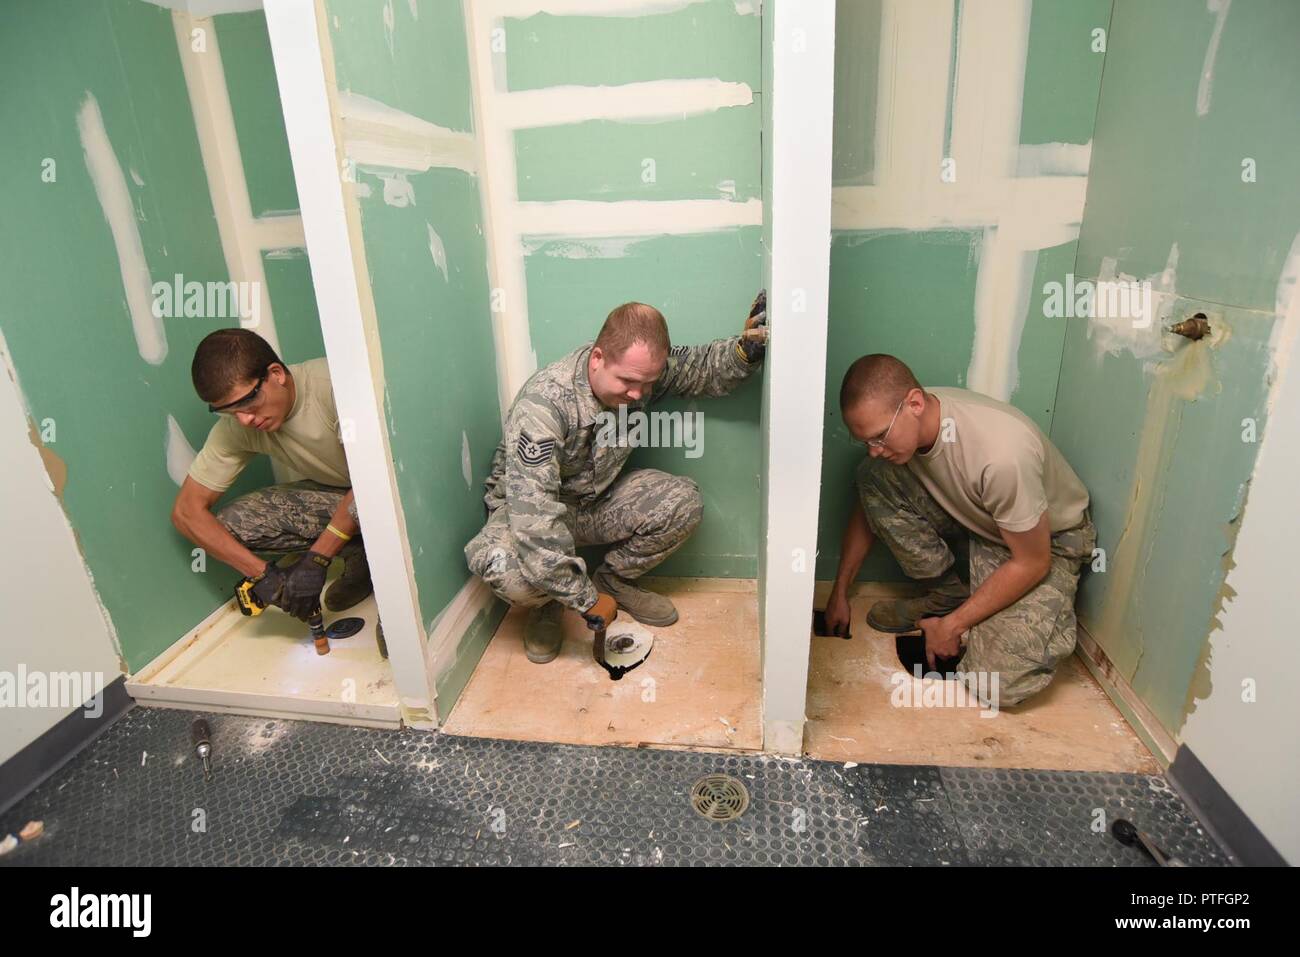 Oregon Air National Guardsman Airman 1st Class Joshua Bietschek (left),  along with Tech. Sgt. Adrian Tate (center) and Staff Sgt. Benjamin Schultz  (right) work on various tasks to rebuild three showers at